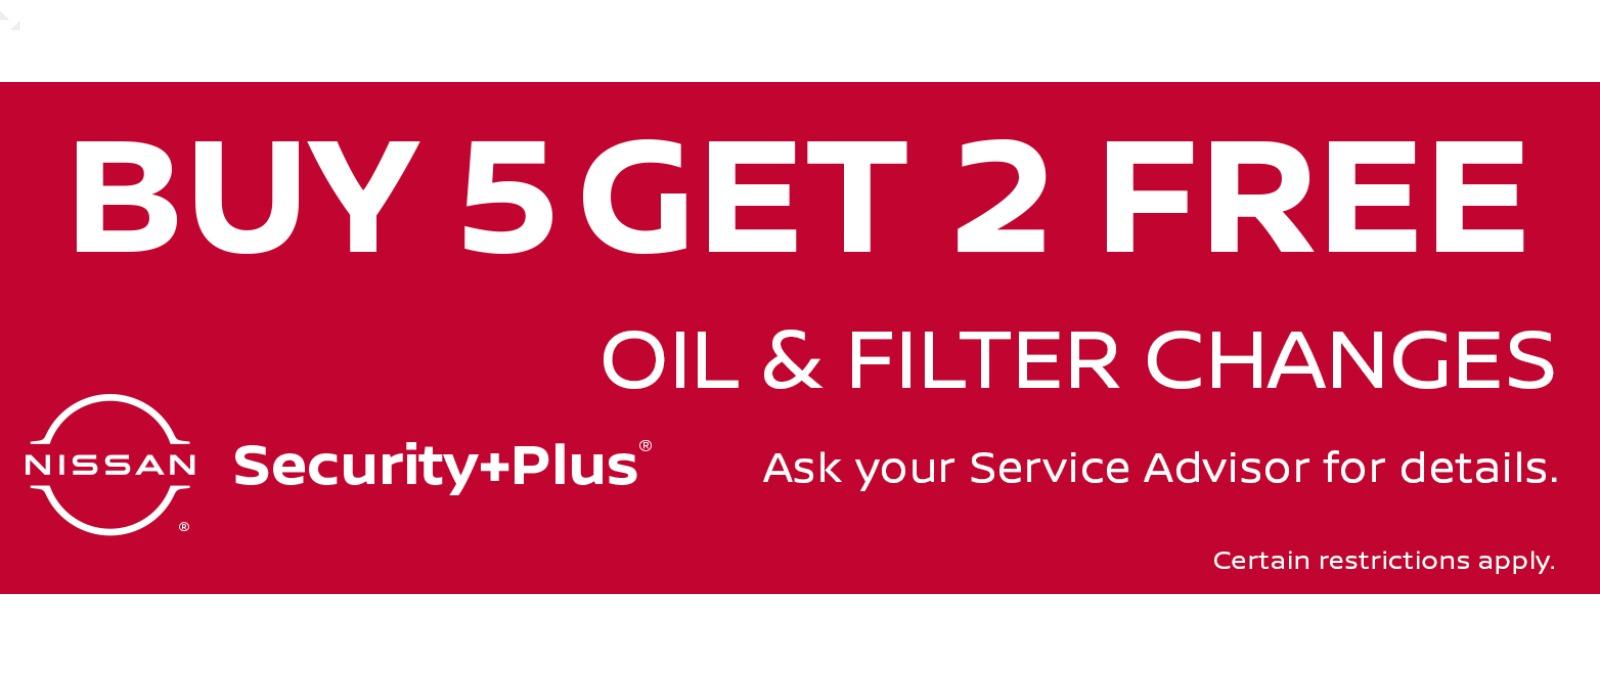 BUY 5 GET 2 FREE OIL & FILTER CHANGES NISSAN Security+PlusⓇ Ask your Service Advisor for details. Certain restrictions apply.